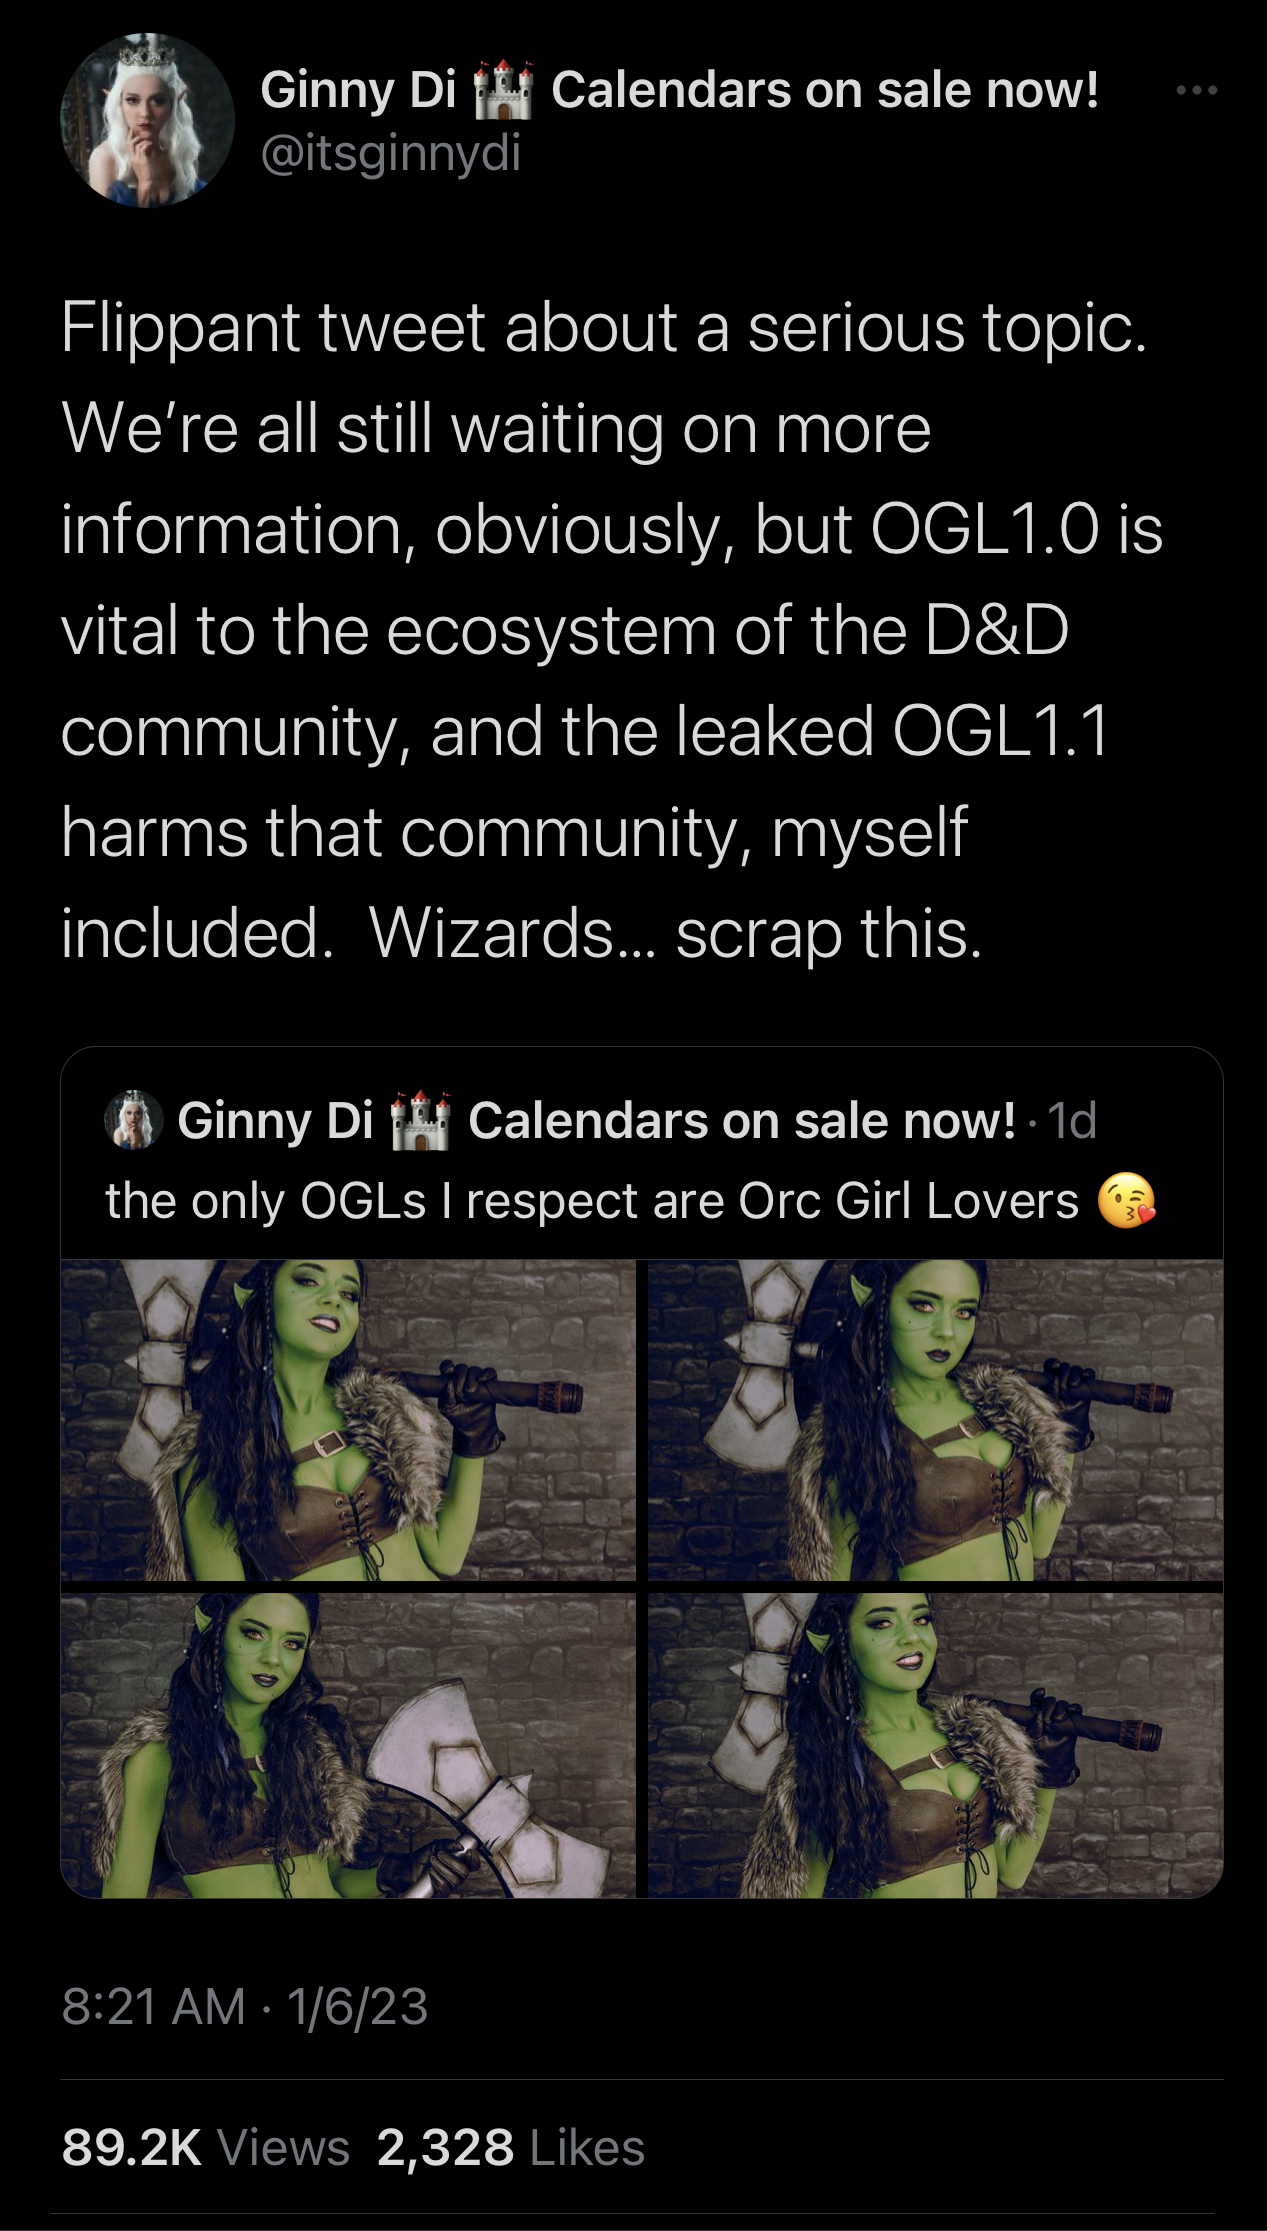 Flippant tweet about a serious topic. We’re all still waiting on more information, obviously, but OGL1.0 is vital to the ecosystem of the D&D community, and the leaked OGL1.1 harms that community, myself included.  Wizards… scrap this.